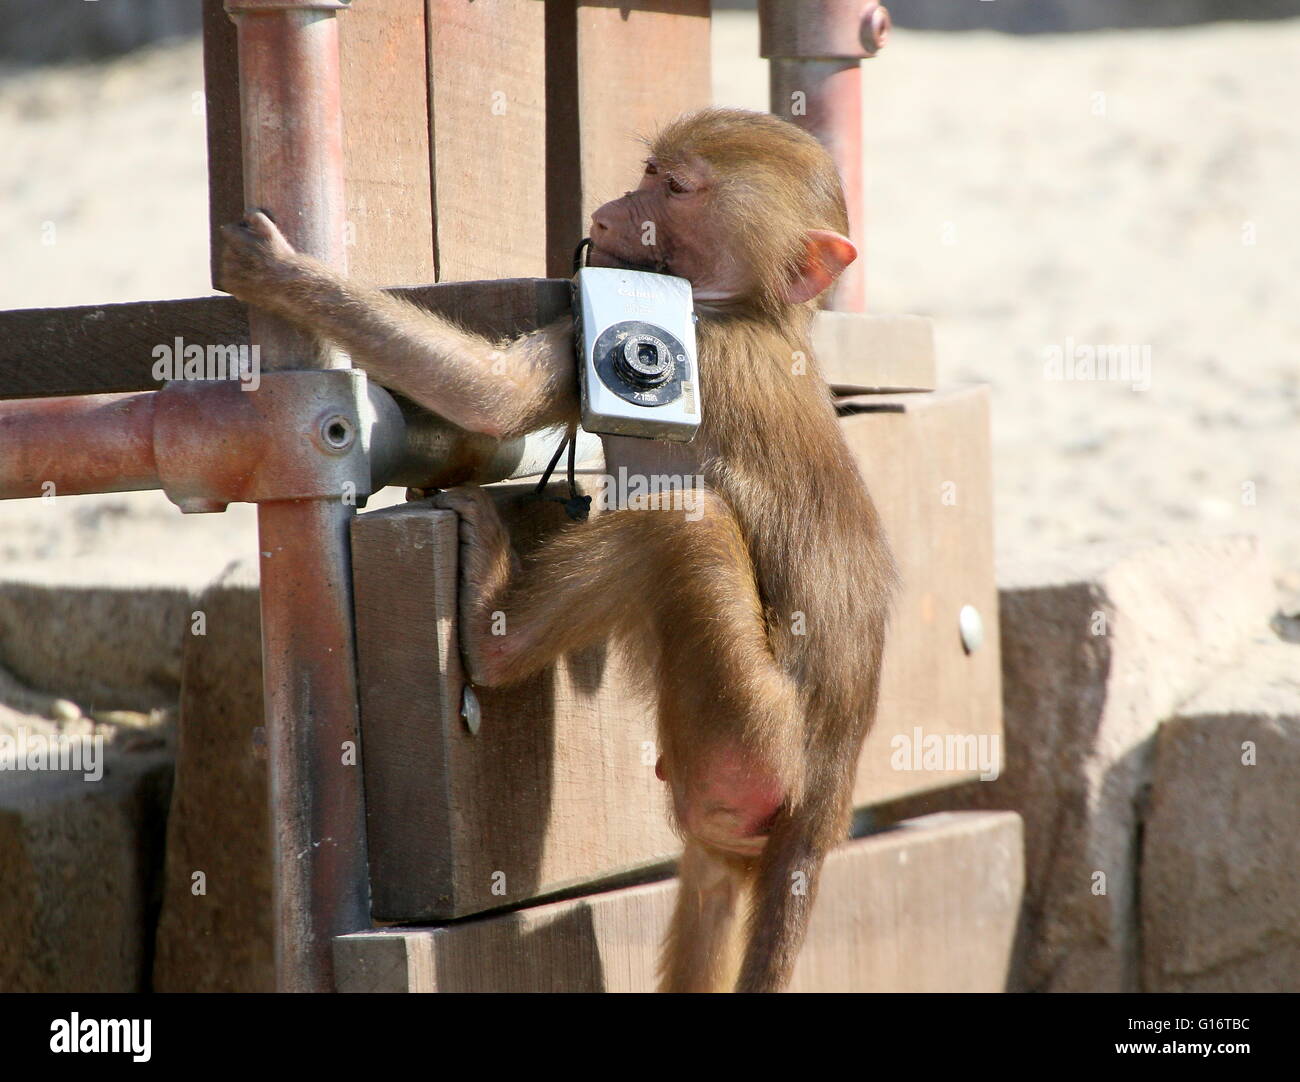 Young African Sacred baboon (Papio hamadryas) boisterously playing with a Canon Compact camera in a Dutch zoo (9 images) Stock Photo